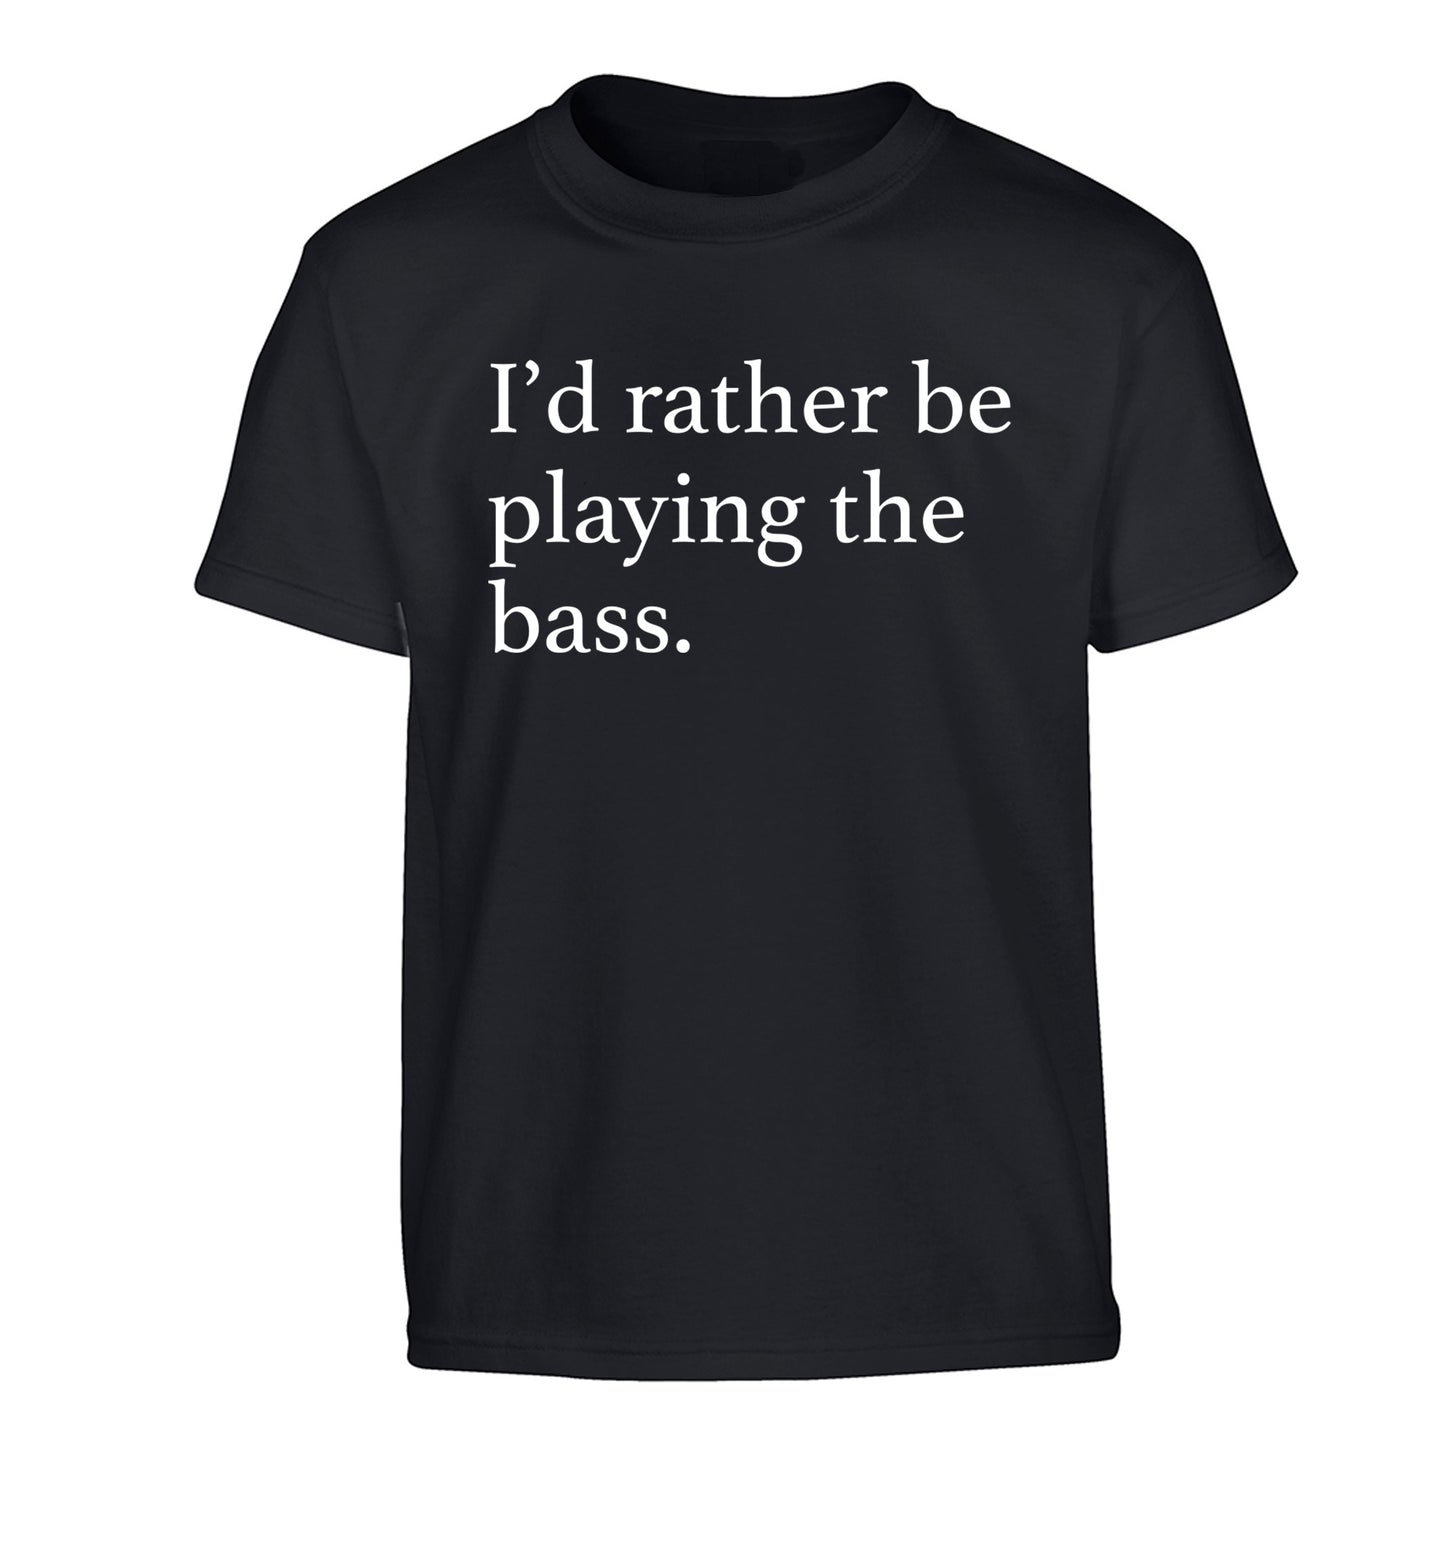 I'd rather by playing the bass Children's black Tshirt 12-14 Years